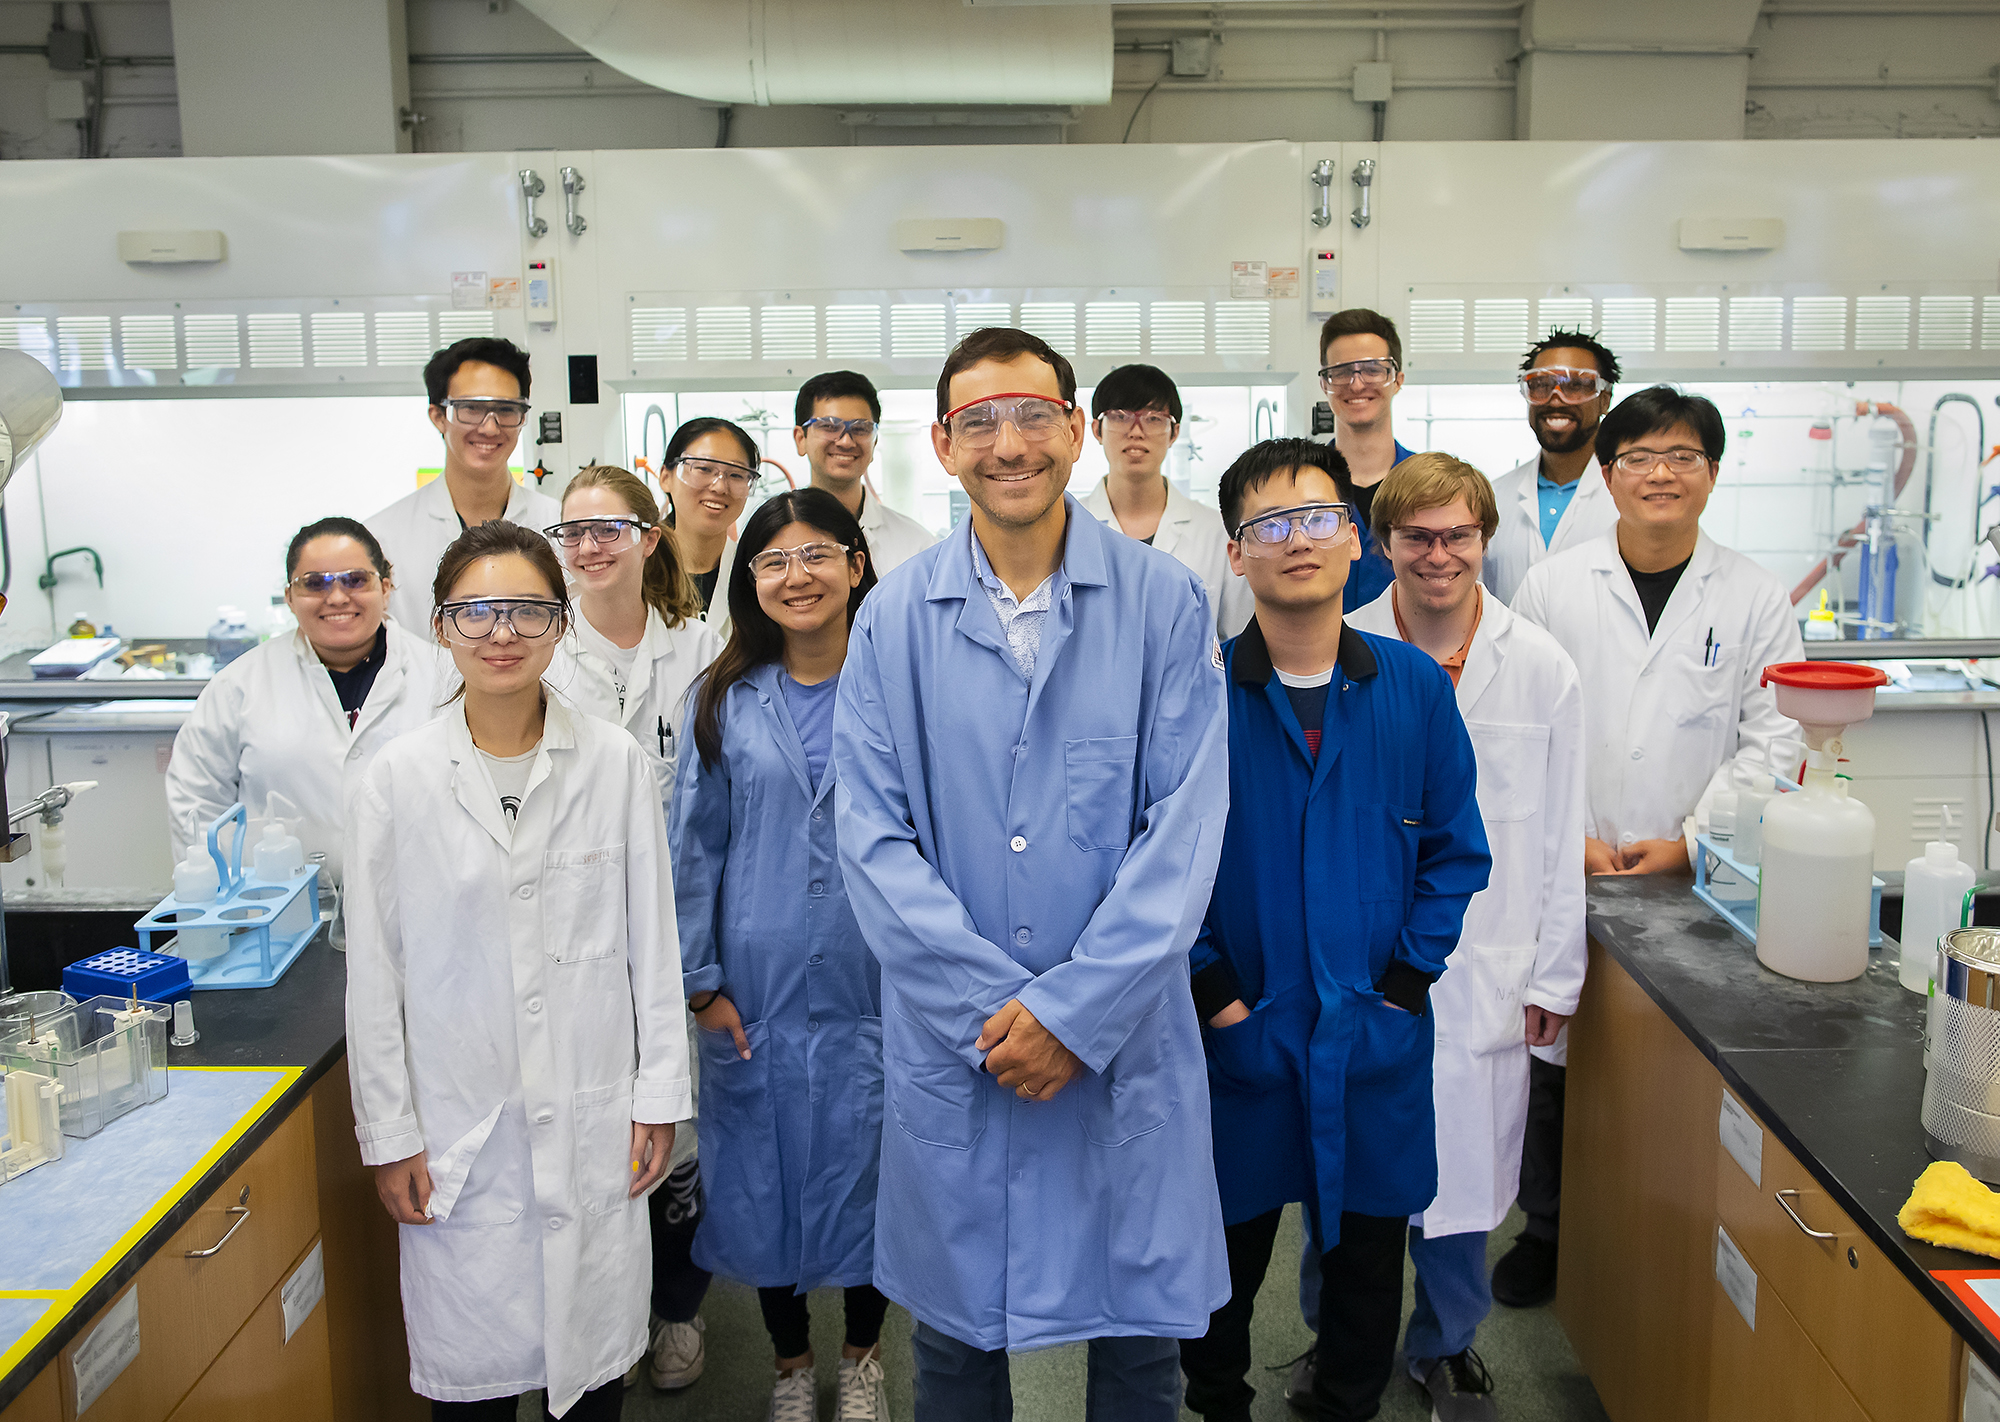 a group of people standing in a chemistry lab wearing lab coats and goggles